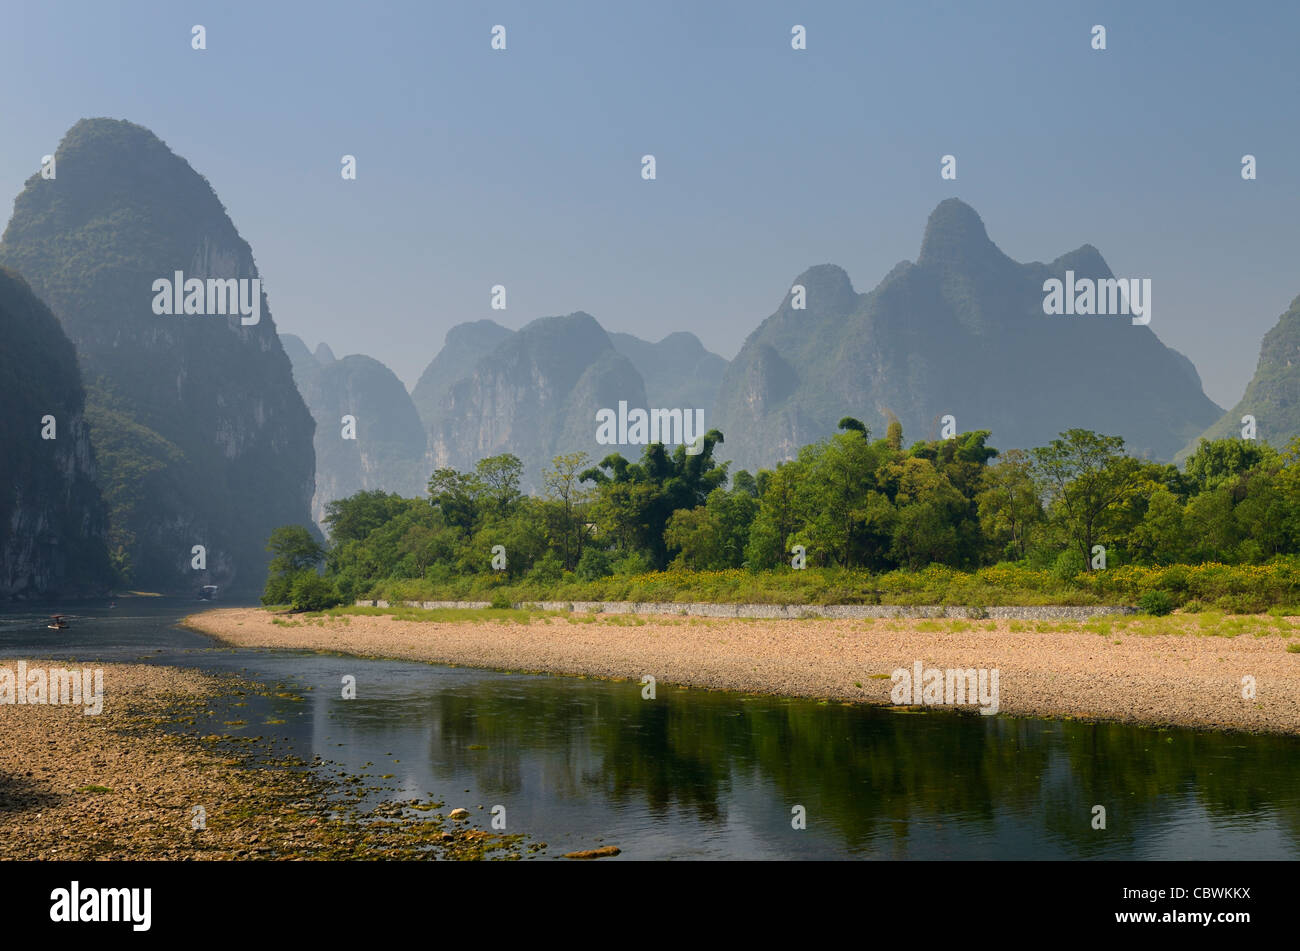 Pebble shore of the Li River with limestone Karst cones and peaks in ...